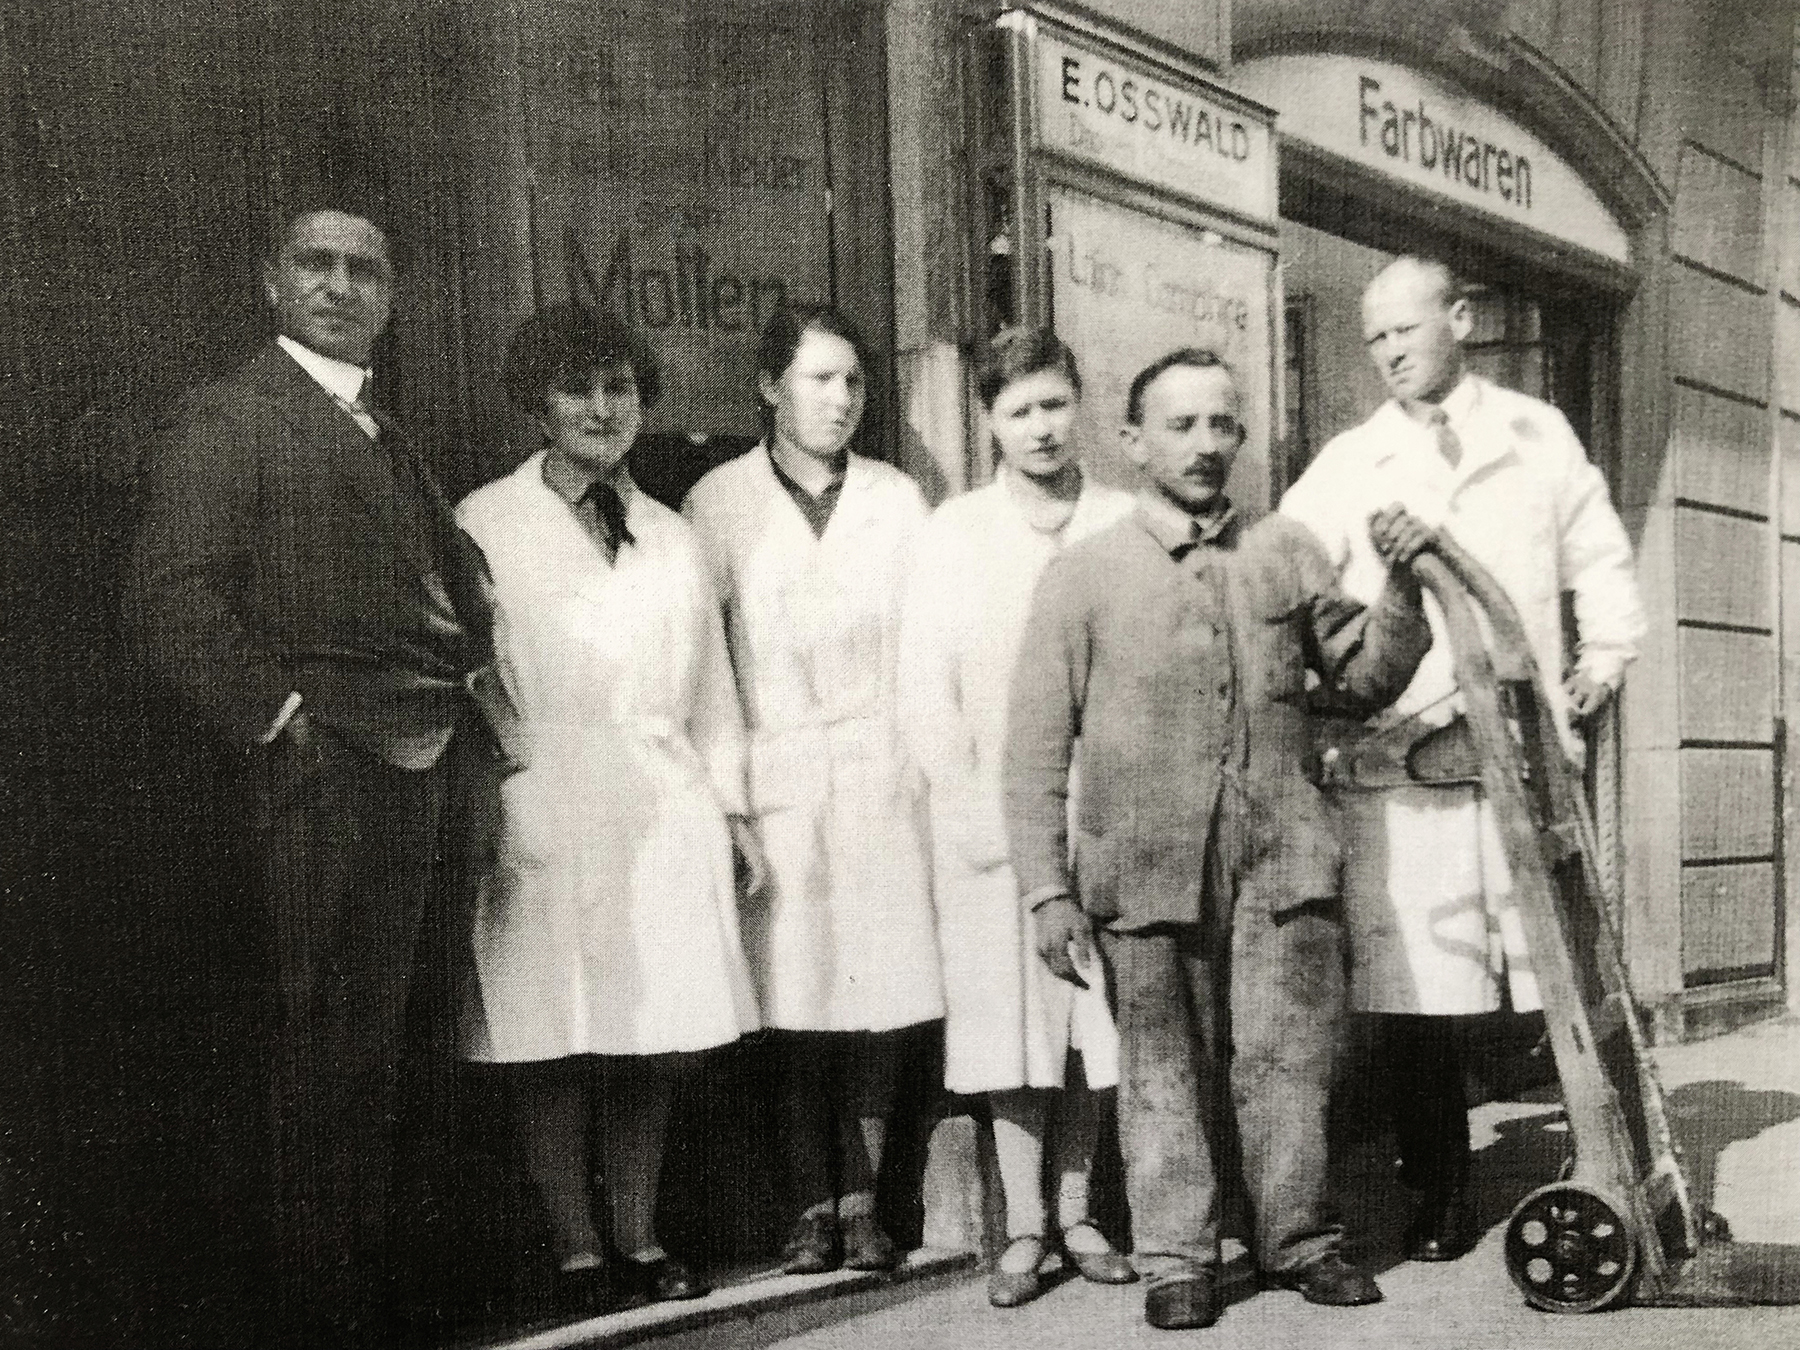 Boris Dreiding (left) and Ernst Osswald (right) with employees in front of the grocery shop, date unknown. (Image: Osswald, Zurich)